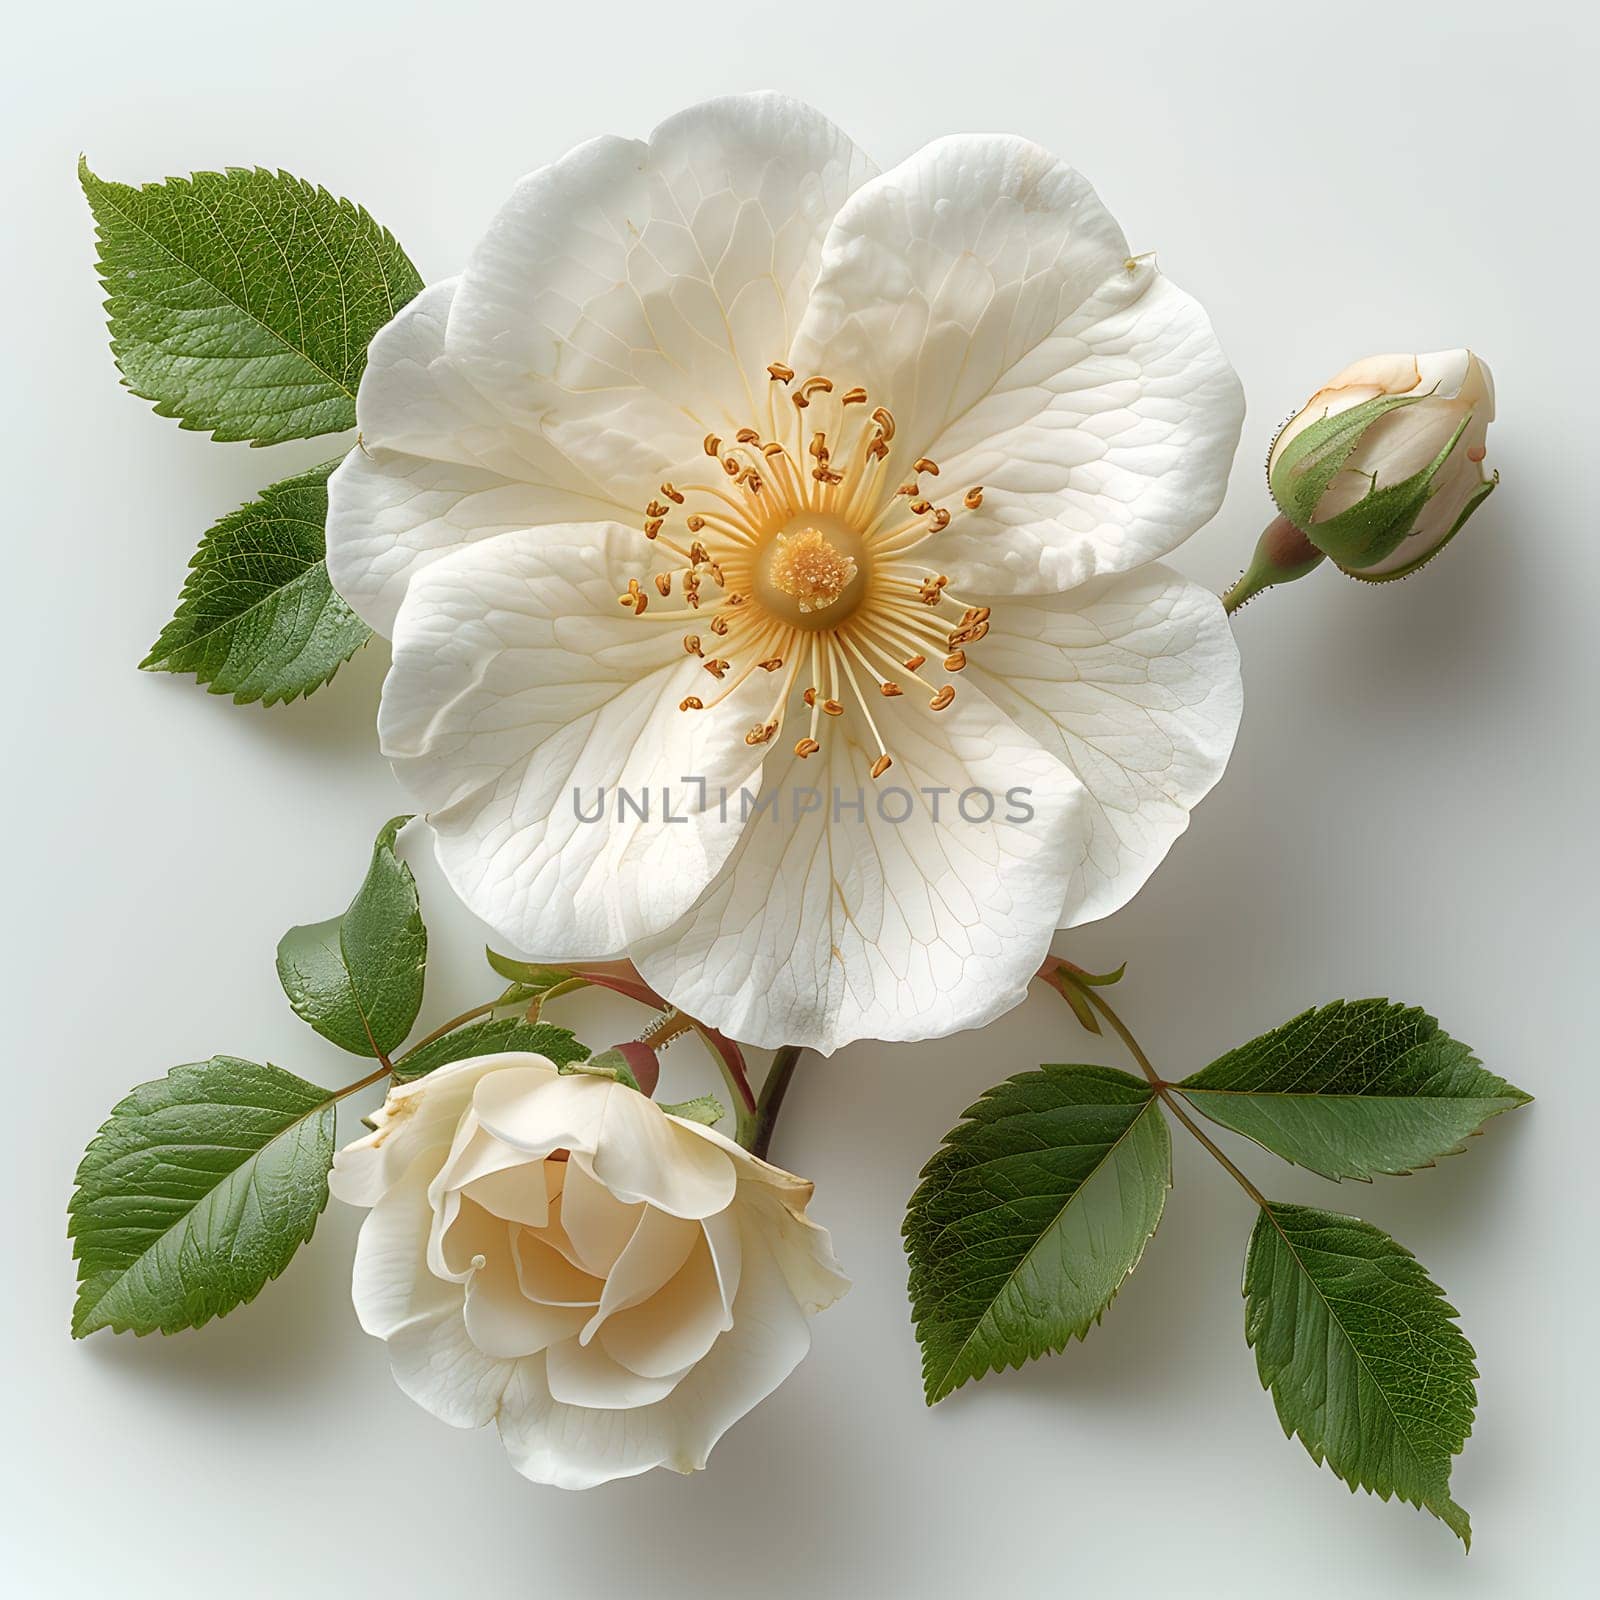 A white blossom with yellow center, green leaves, part of the rose family by Nadtochiy